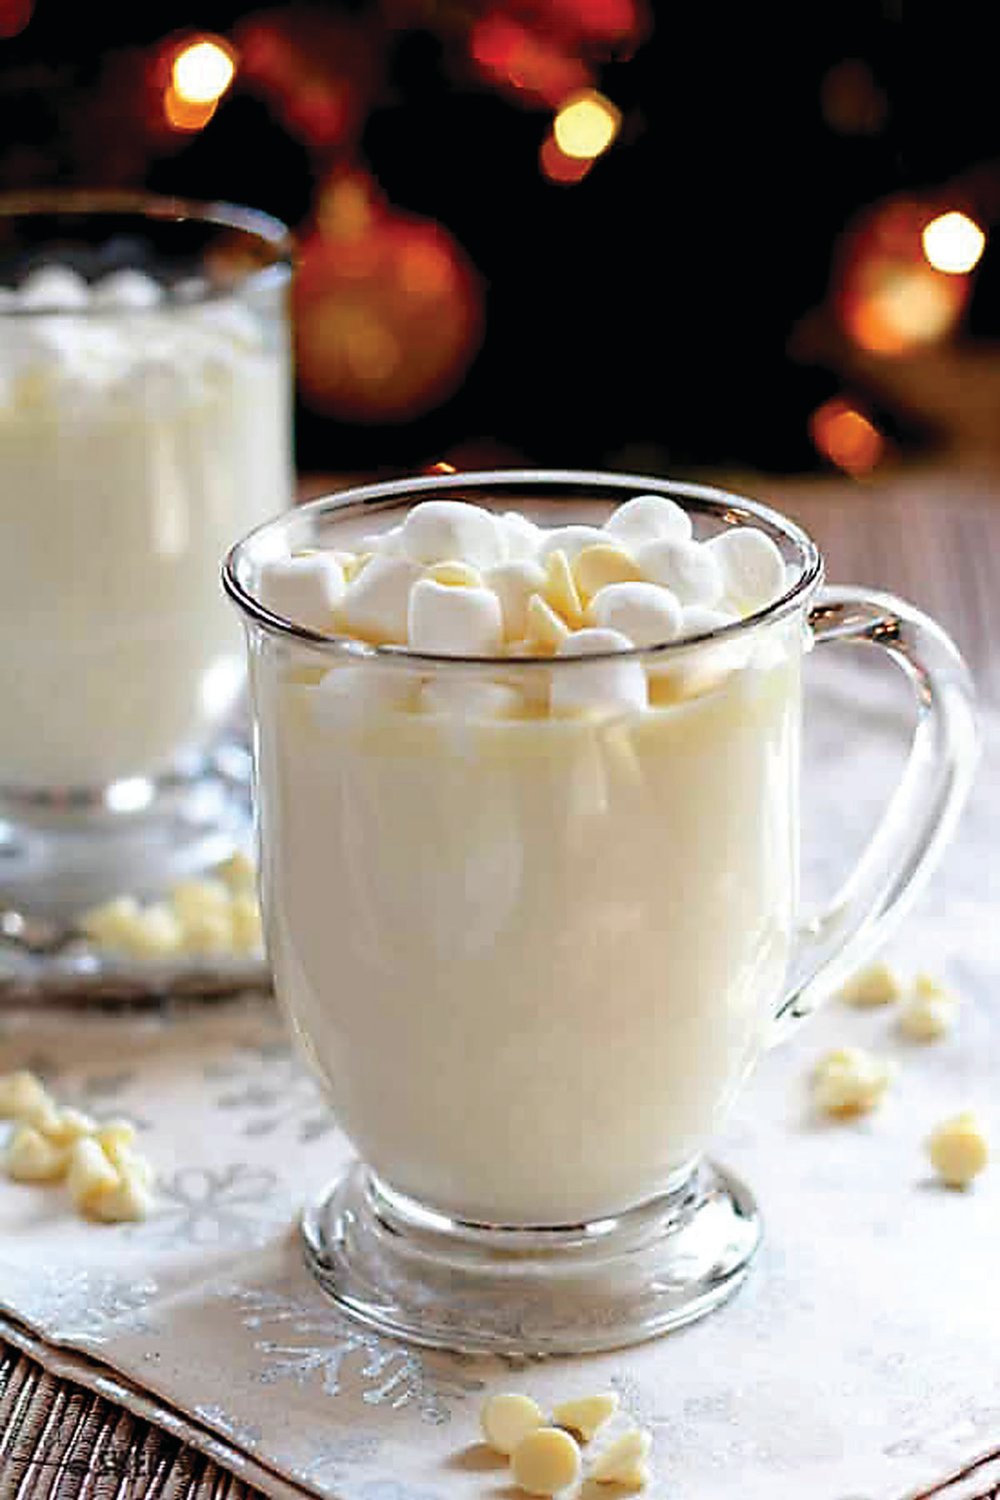 Hot chocolate, whether traditional or white, is a sweet way to warm up in winter.